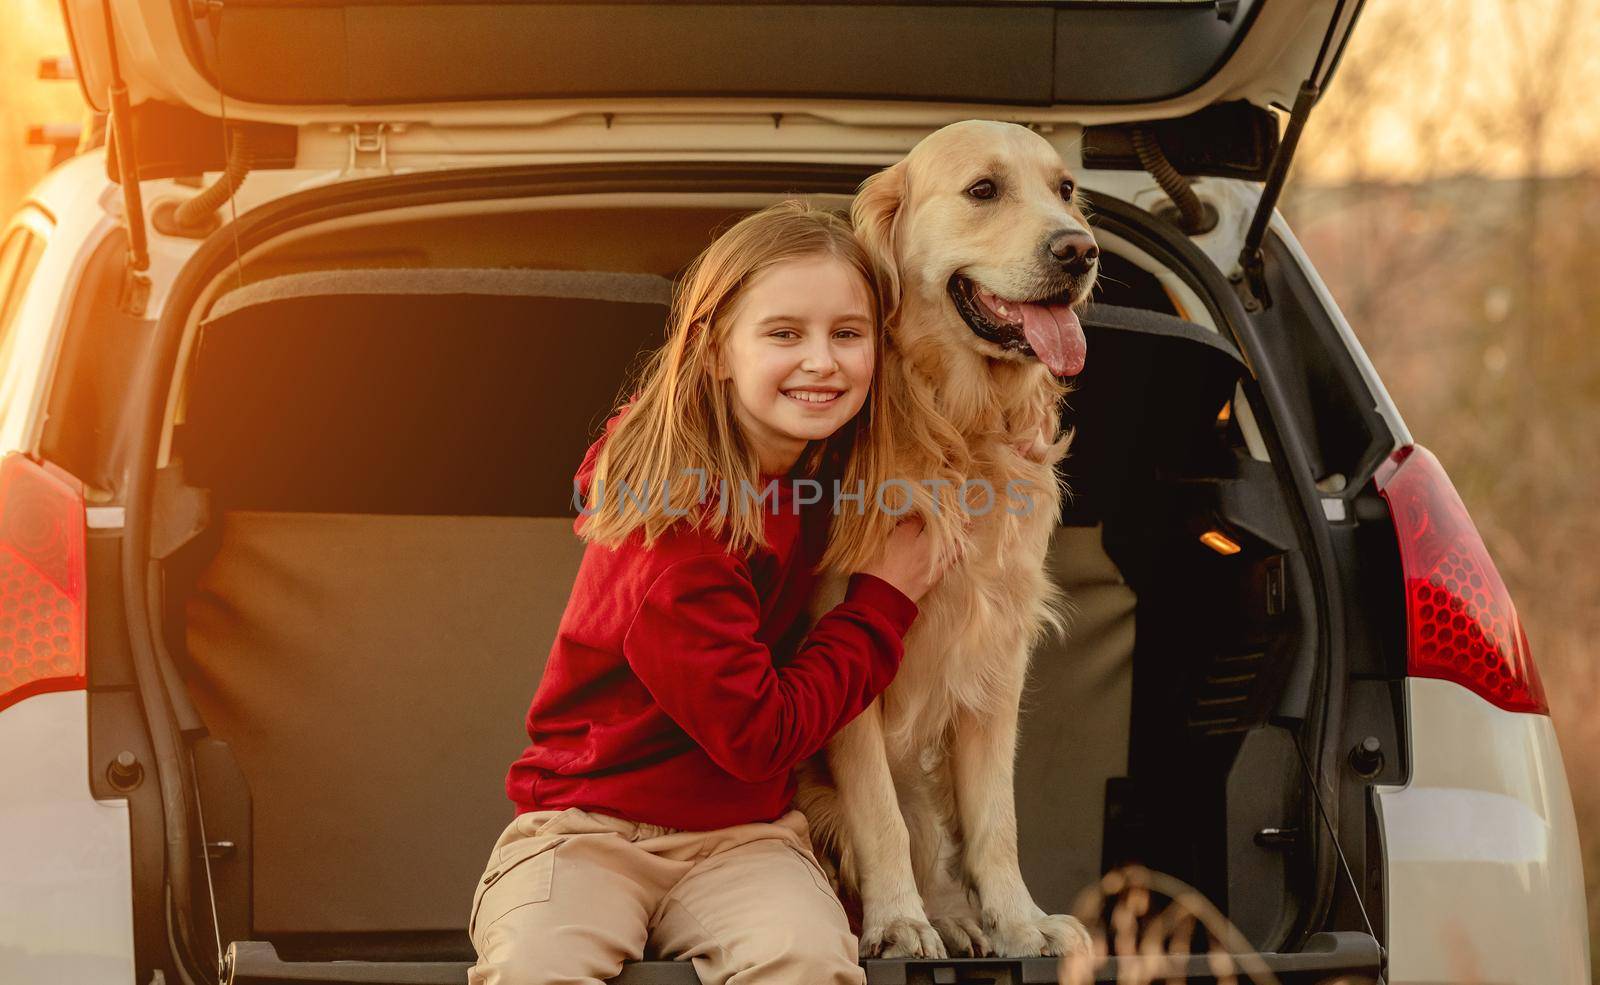 Girl child hugging golden retriever dog sitting in car trunk outdoors. Pretty kid petting doggy pet labrador and smiling in vehicle at nature